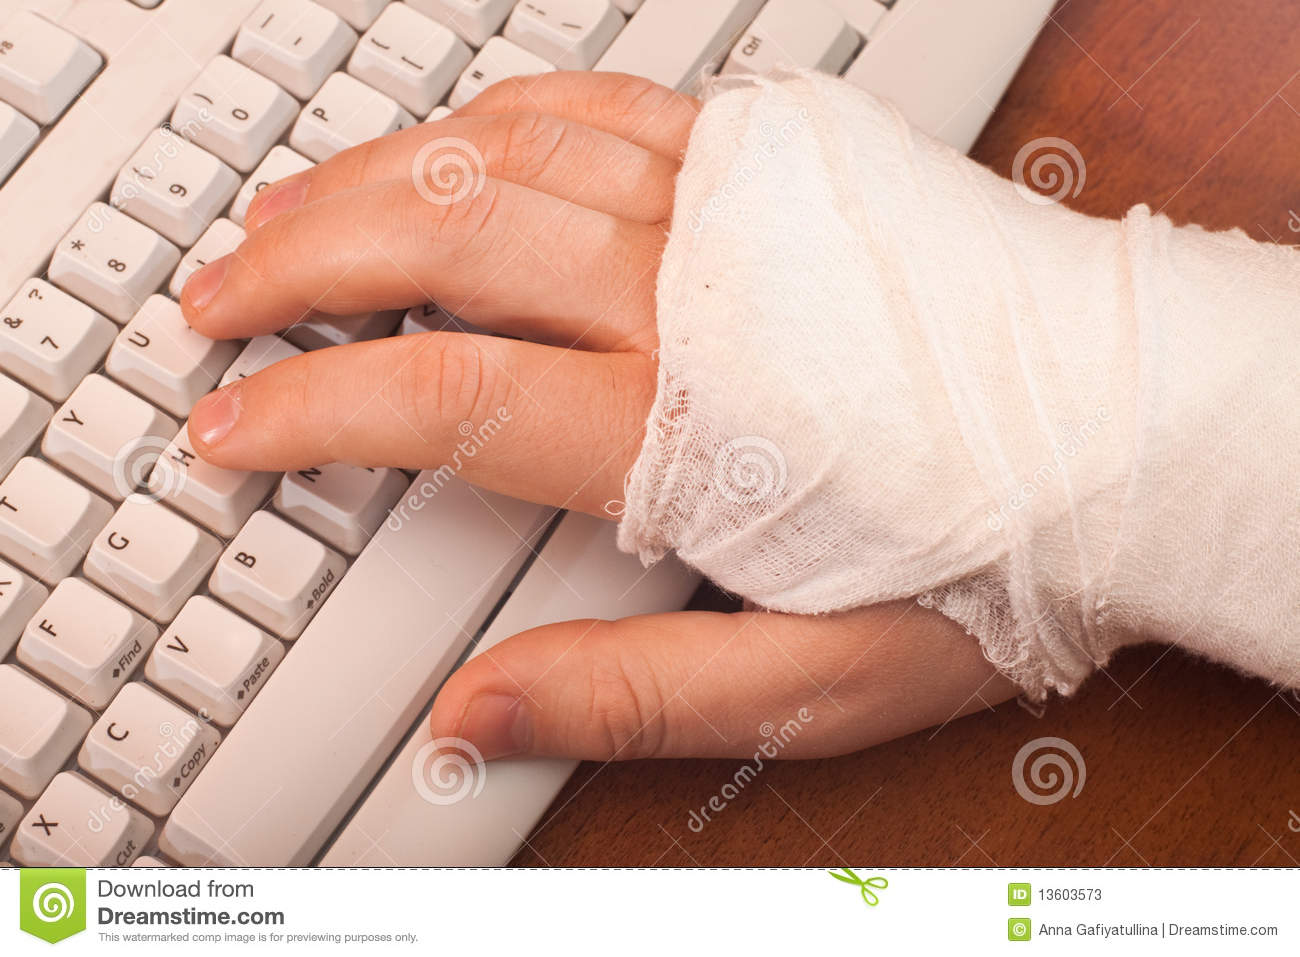 Arm In Plaster On The Keyboard Stock Photos   Image  13603573